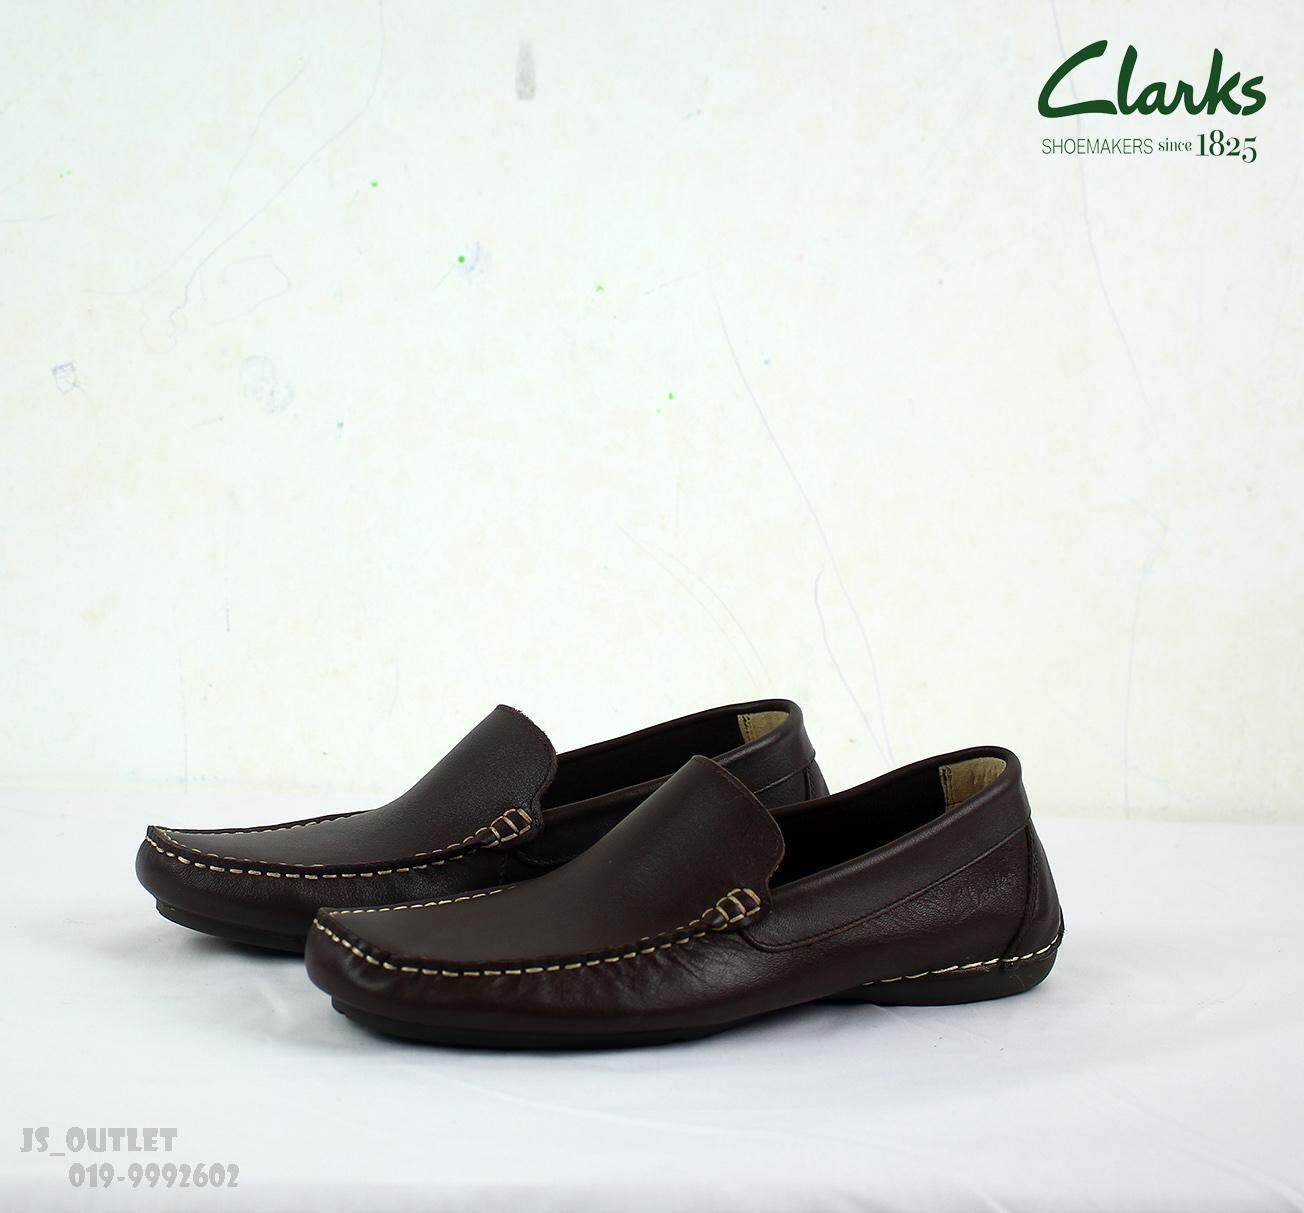 price for clarks shoes